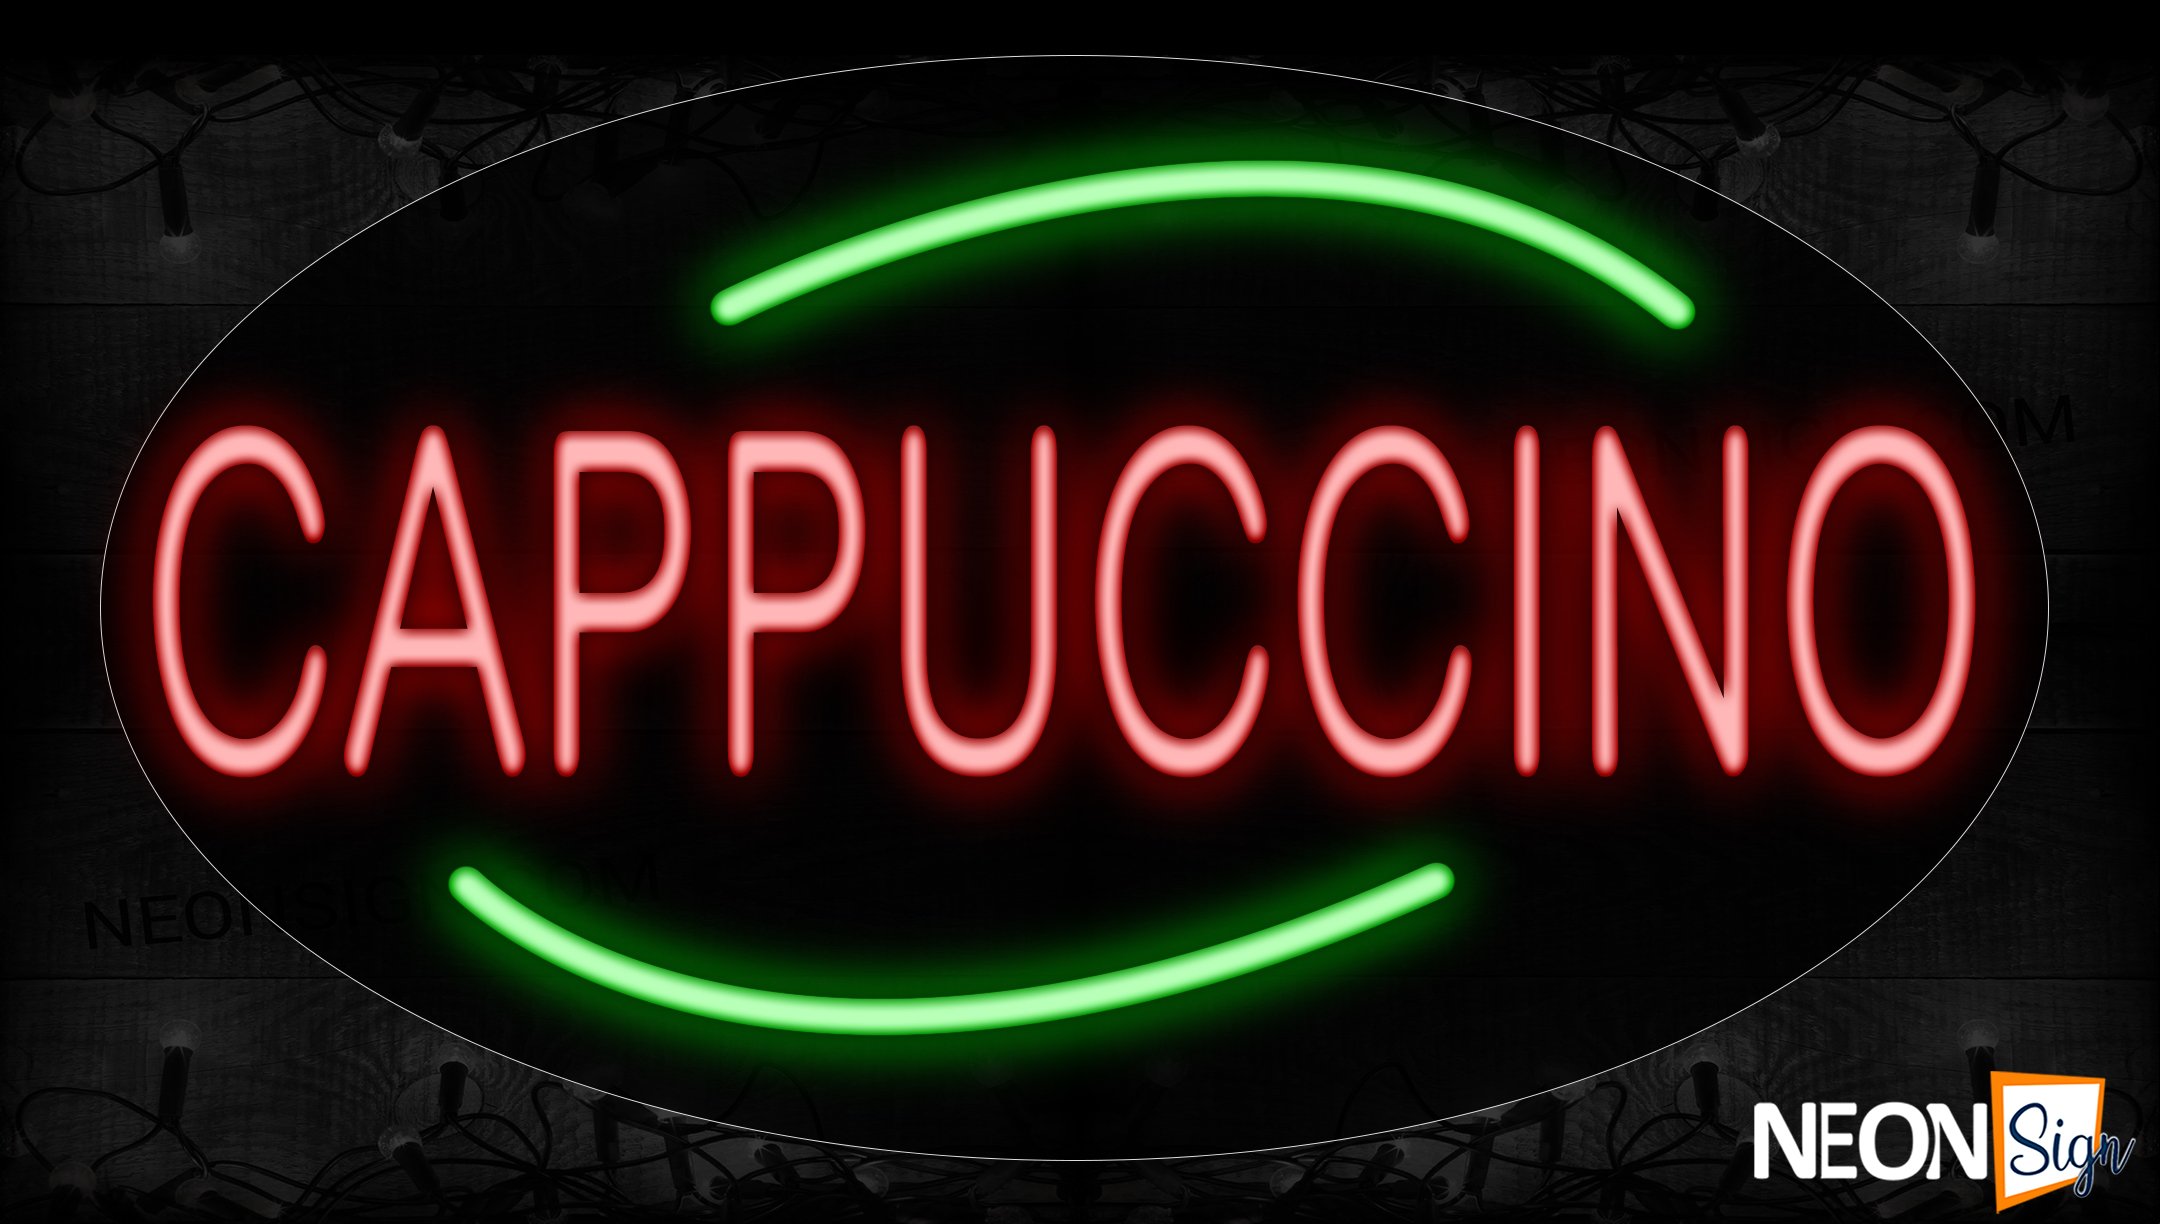 Image of 14169 Cappuccino With Green Arc Border Led Bulb Sign_17x30 Contoured Black Backing